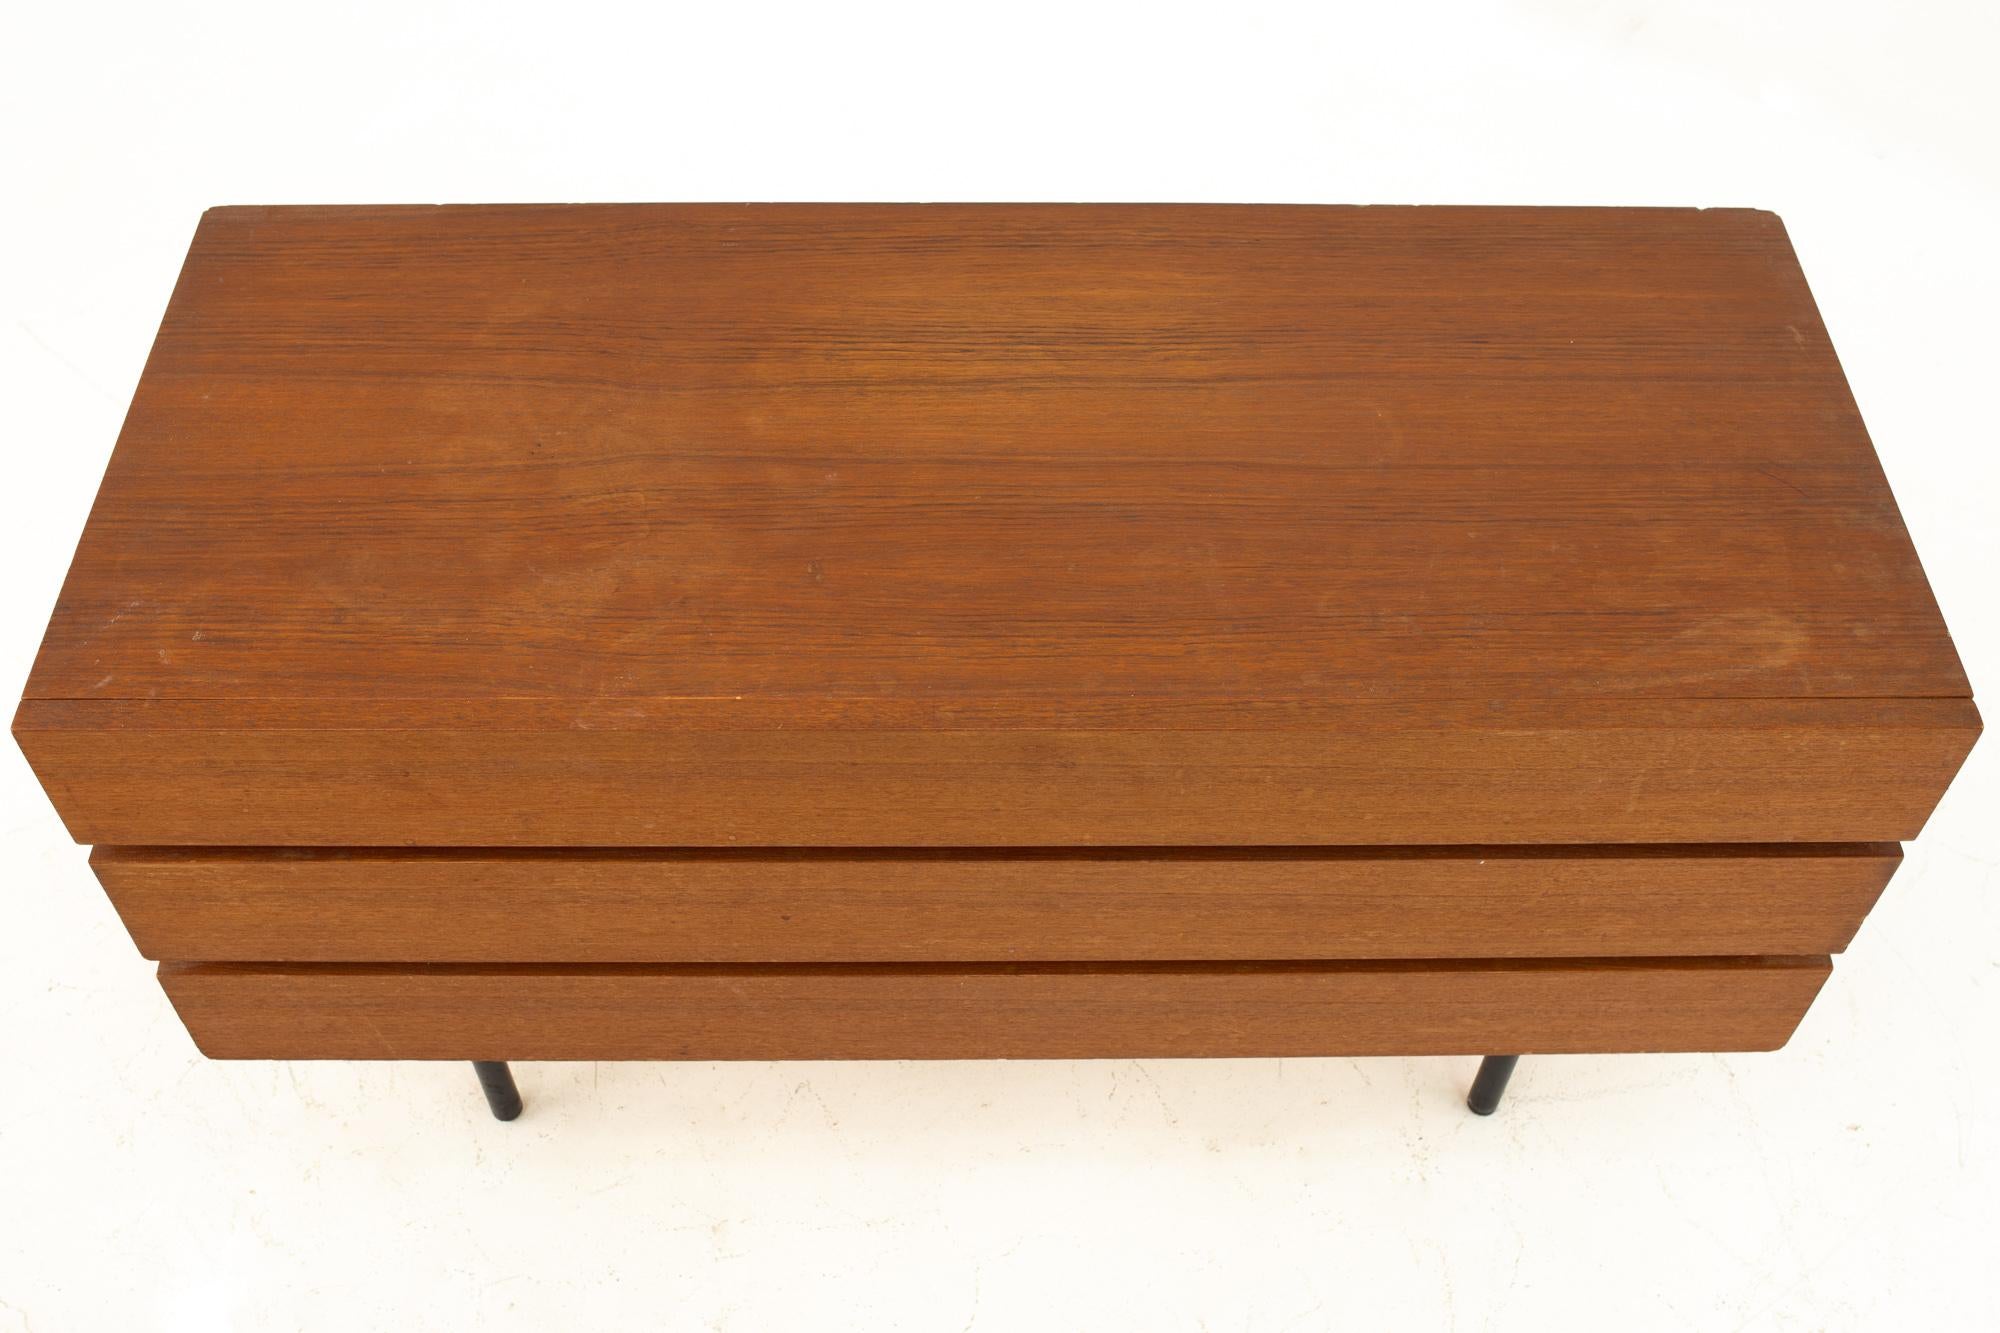 Danish teak Mid Century 3-drawer nightstand

Nightstand measures: 29.5 wide x 16.5 deep x 20.5 high

This price includes getting this piece in what we call restored vintage condition. That means the piece is permanently fixed upon purchase so it’s